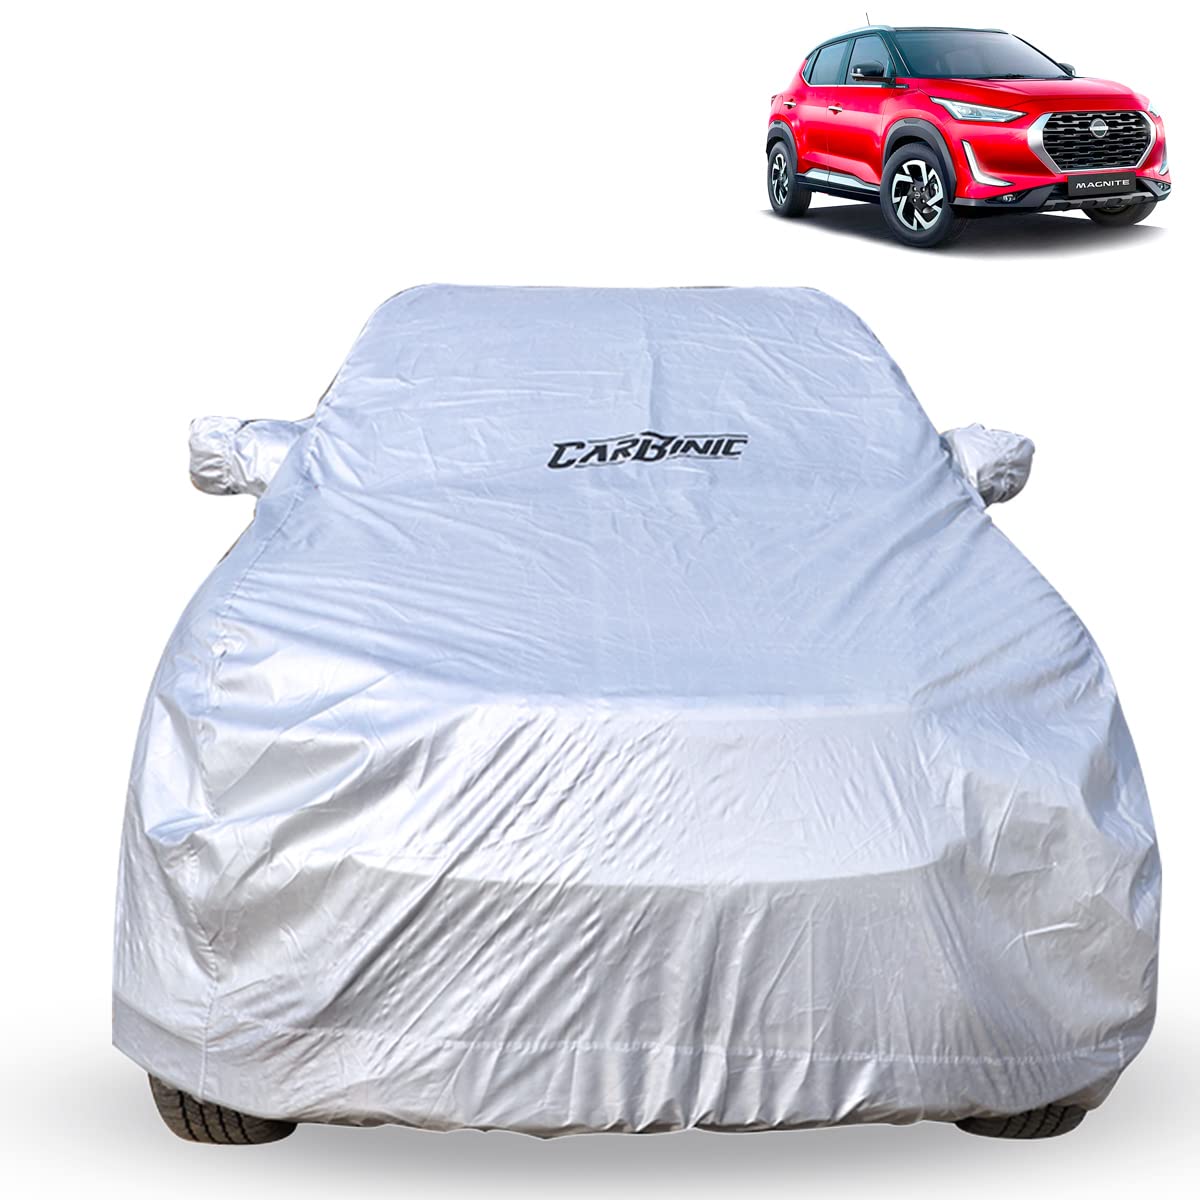 CARBINIC Car Body Cover for Nissan Magnite 2022 | Water Resistant, UV Protection Car Cover | Scratchproof Body Shield | Dustproof All-Weather Cover | Mirror Pocket & Antenna | Car Accessories, Grey